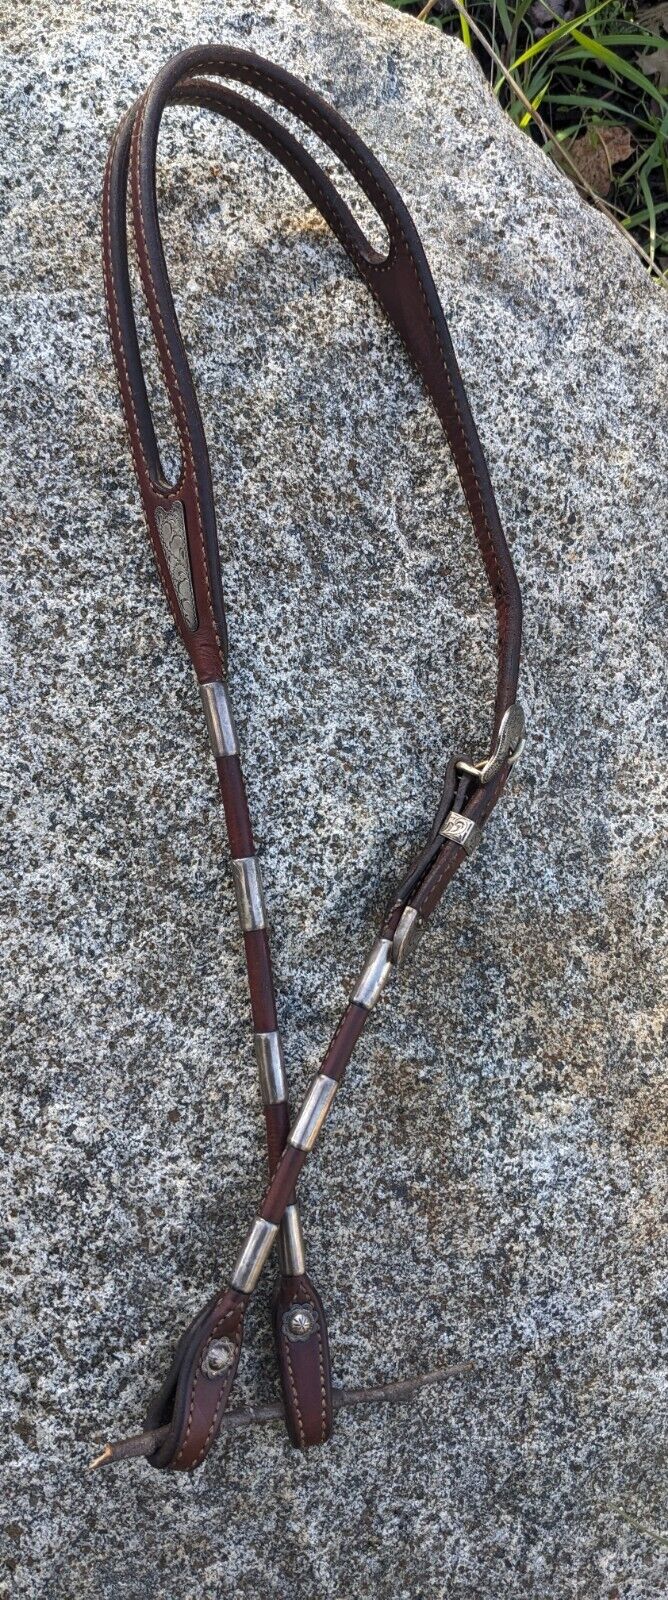 Absolutely Stunning Sterling Silver Vintage Poco Lena Ferrule Headstall